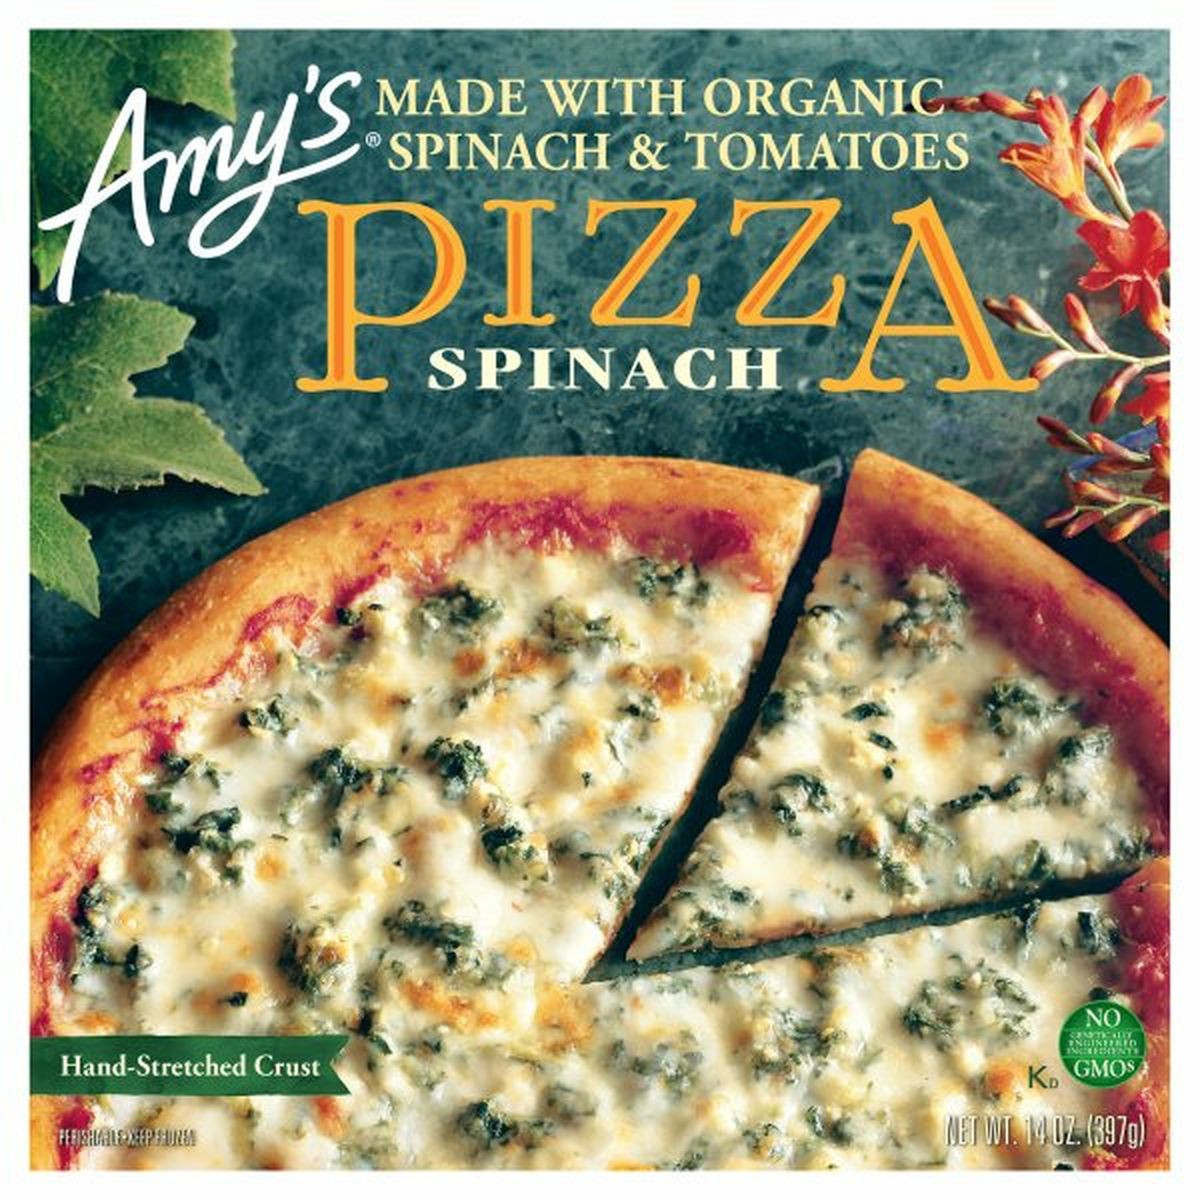 Calories in Amy's Kitchen Pizza, Spinach